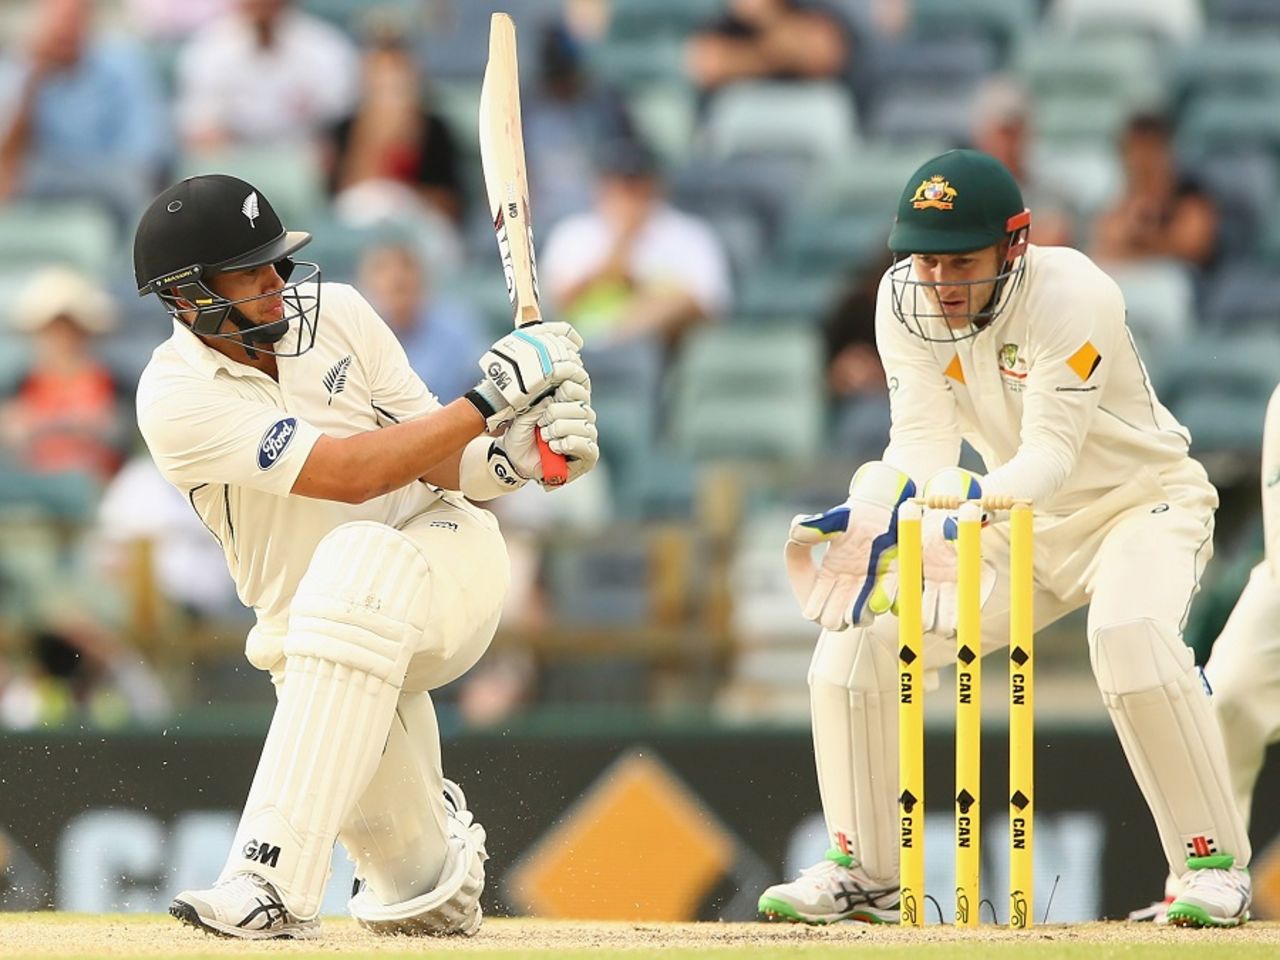 Ross Taylor played the sweep to excellent effect, Australia v New Zealand, 2nd Test, Perth, 5th day, November 17, 2015